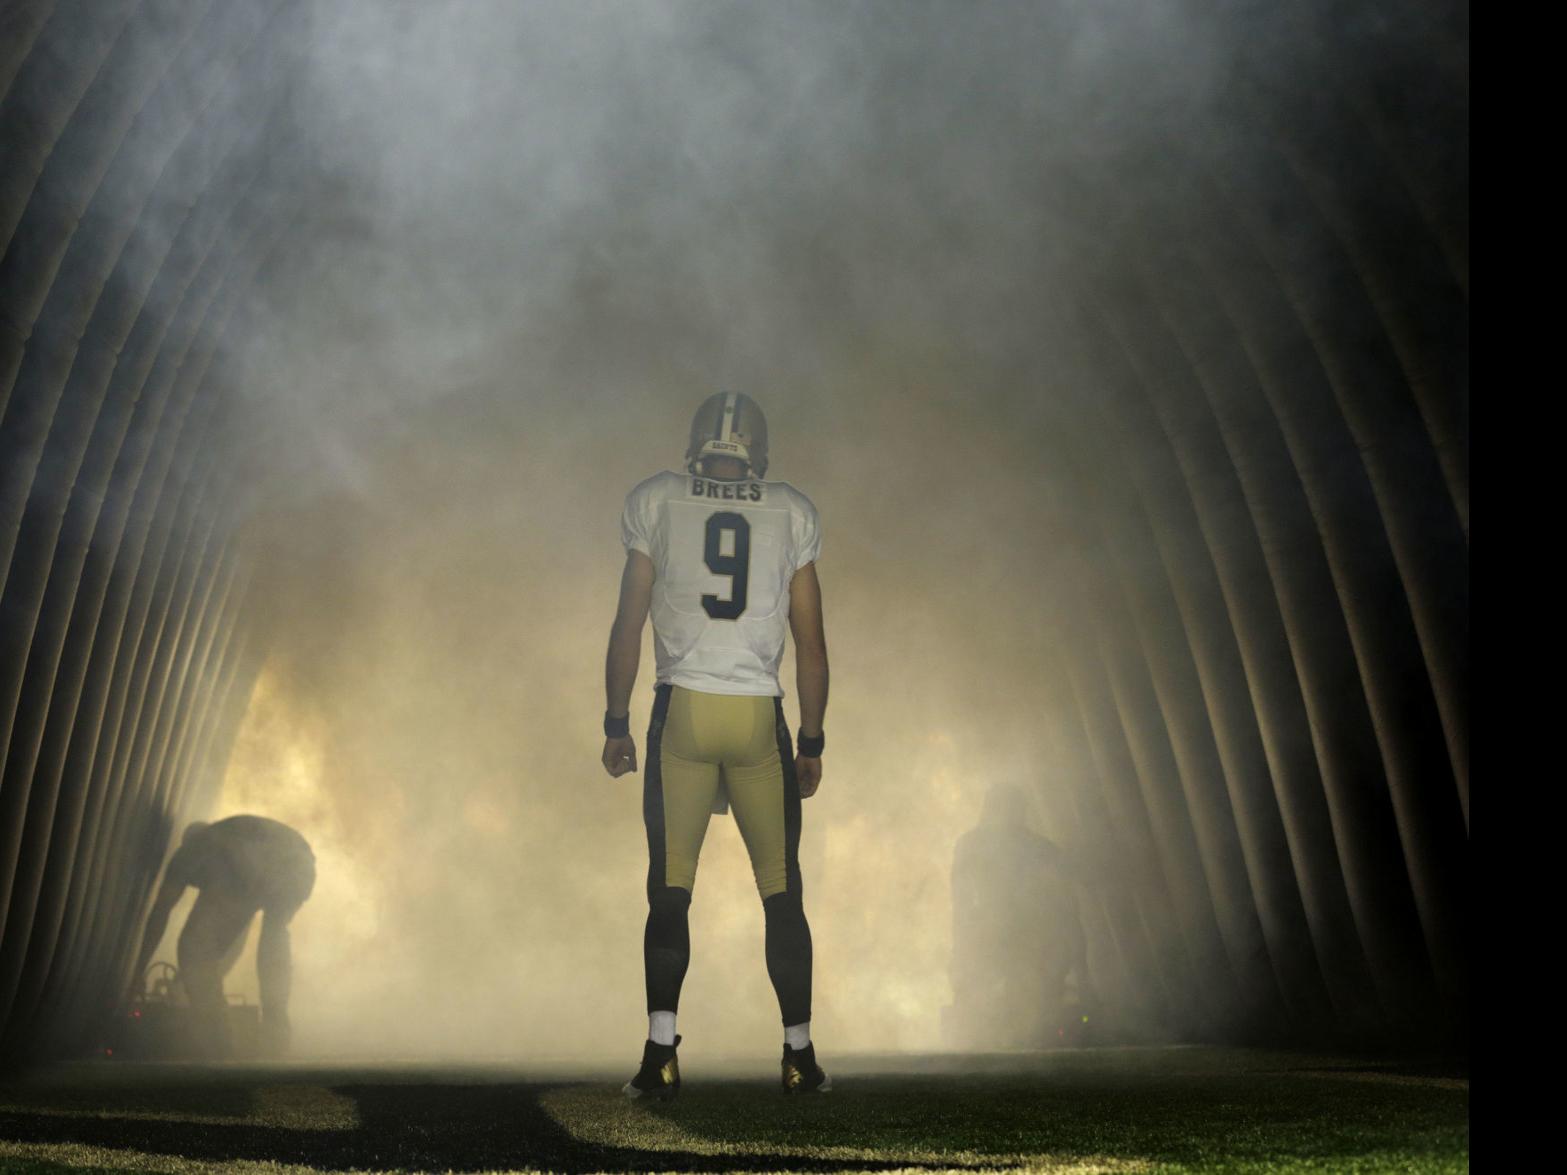 Drew Brees' comeback from injuries a work in progress